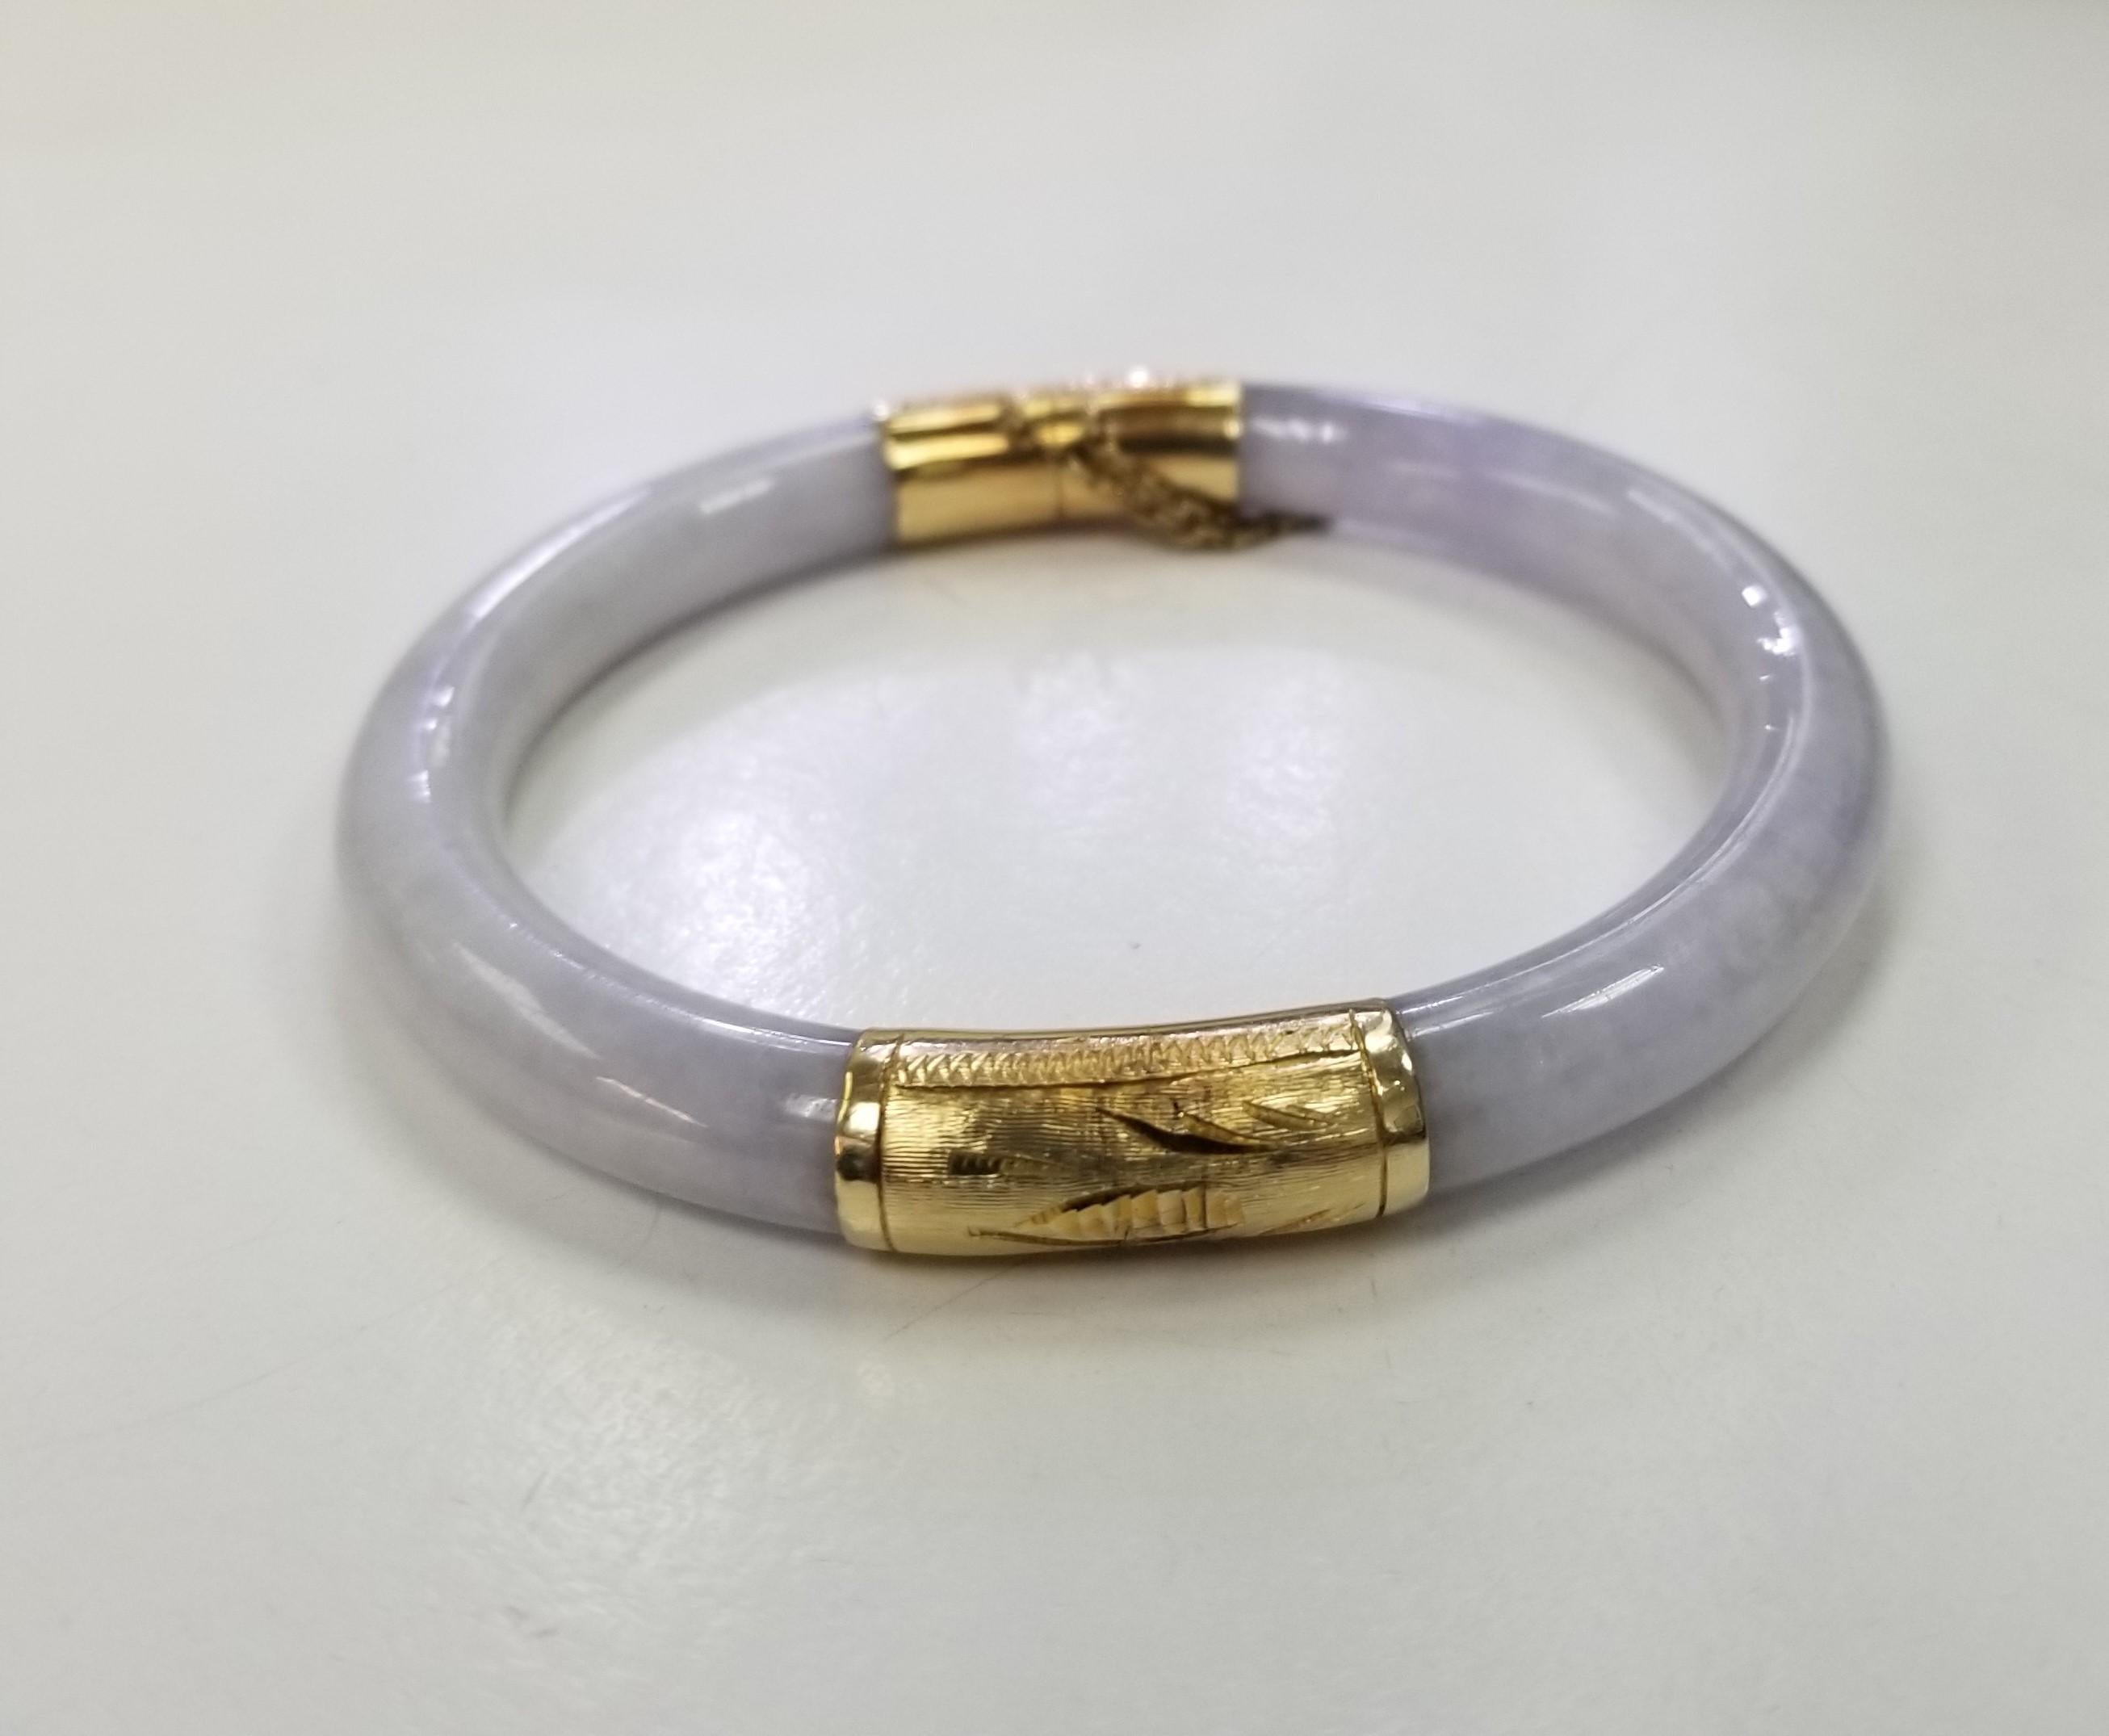 A 14 karat yellow gold lavender jade hinged bangle bracelet. This carved lavender jade bangle has floral engraved gold end caps with a hinge at one end and a clasp at the other.
Width: 7.25 mm
28 Grams
* Please note that this is a vintage item and